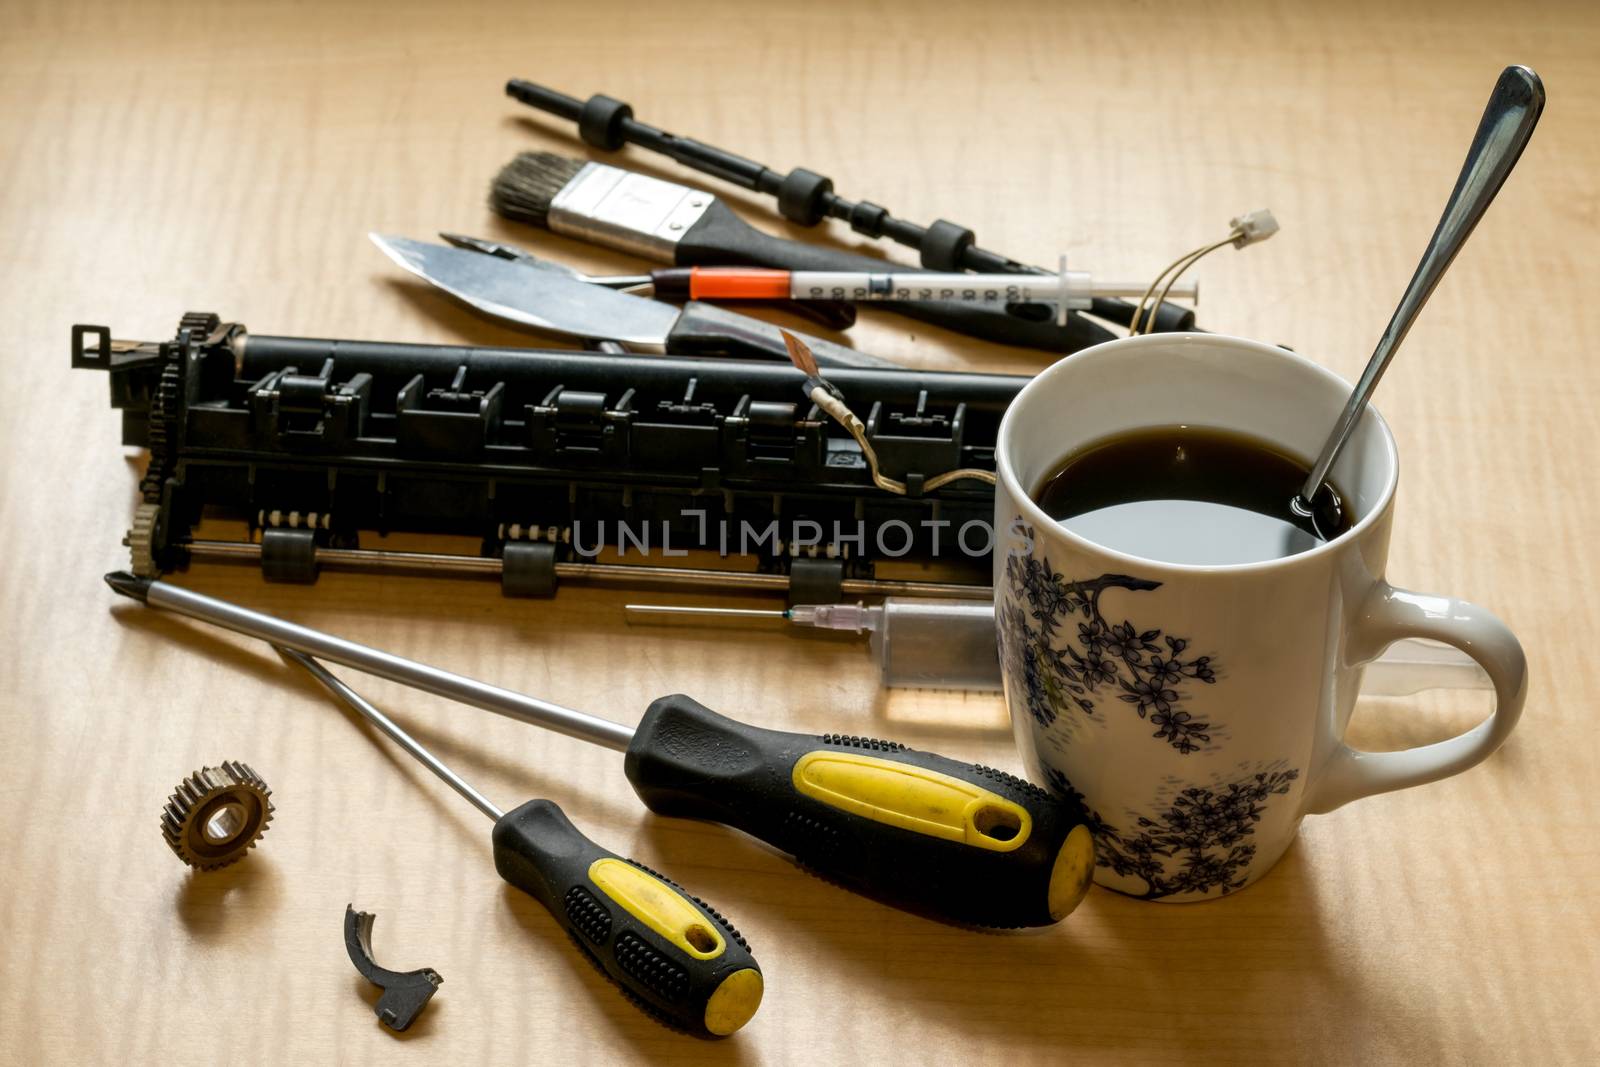 printer parts, tools, grease, broken gear and coffee mug on the table